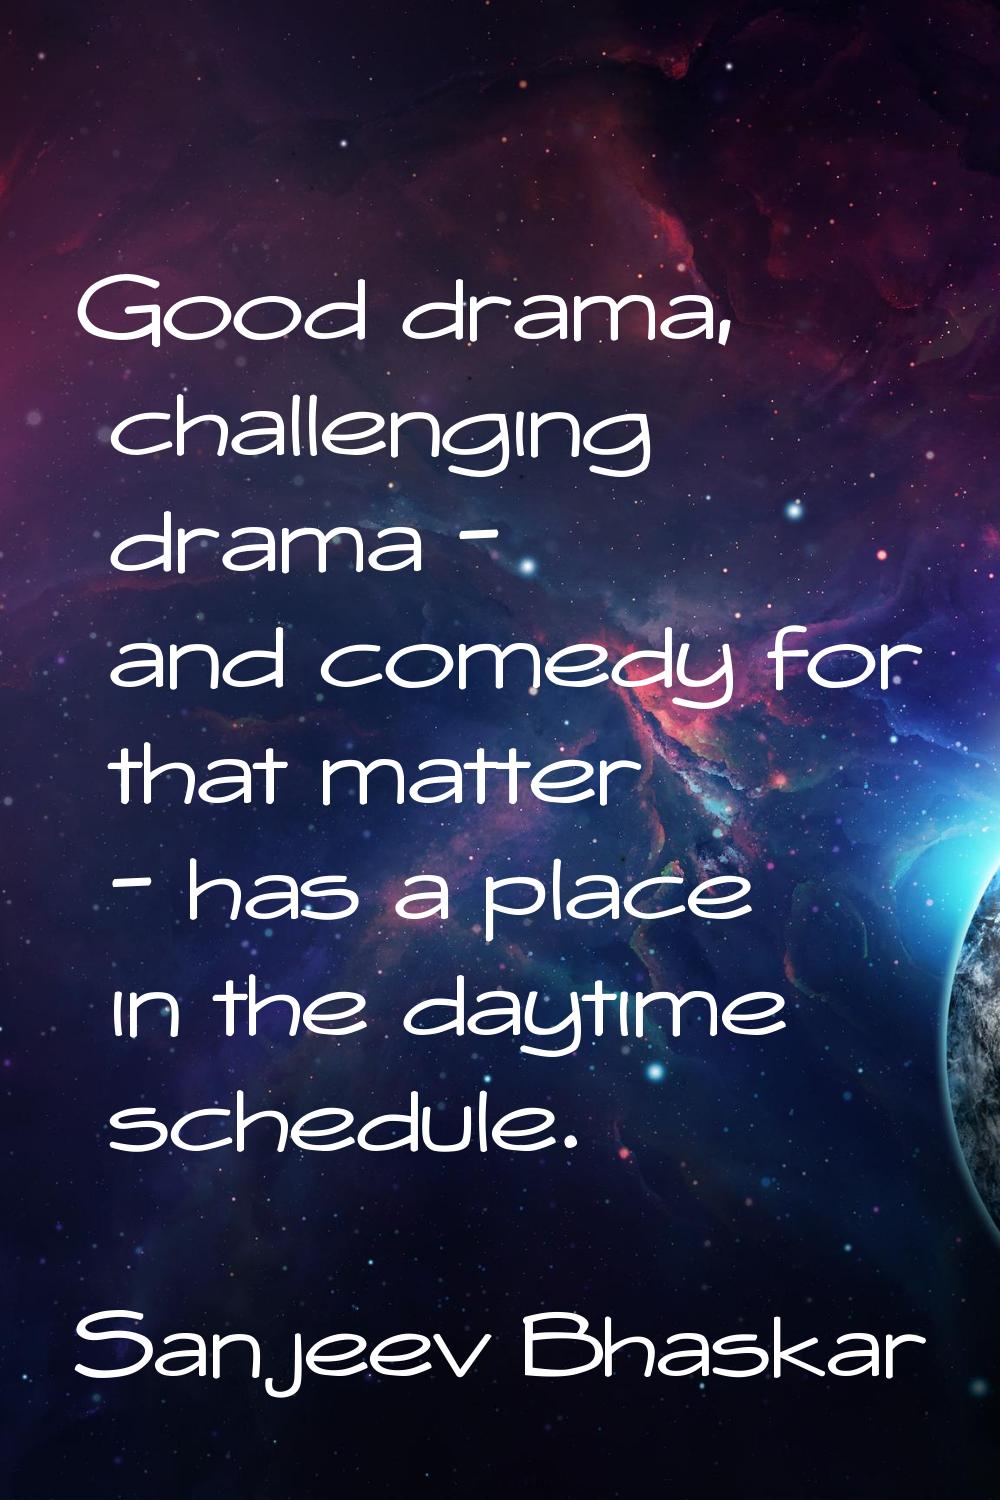 Good drama, challenging drama - and comedy for that matter - has a place in the daytime schedule.